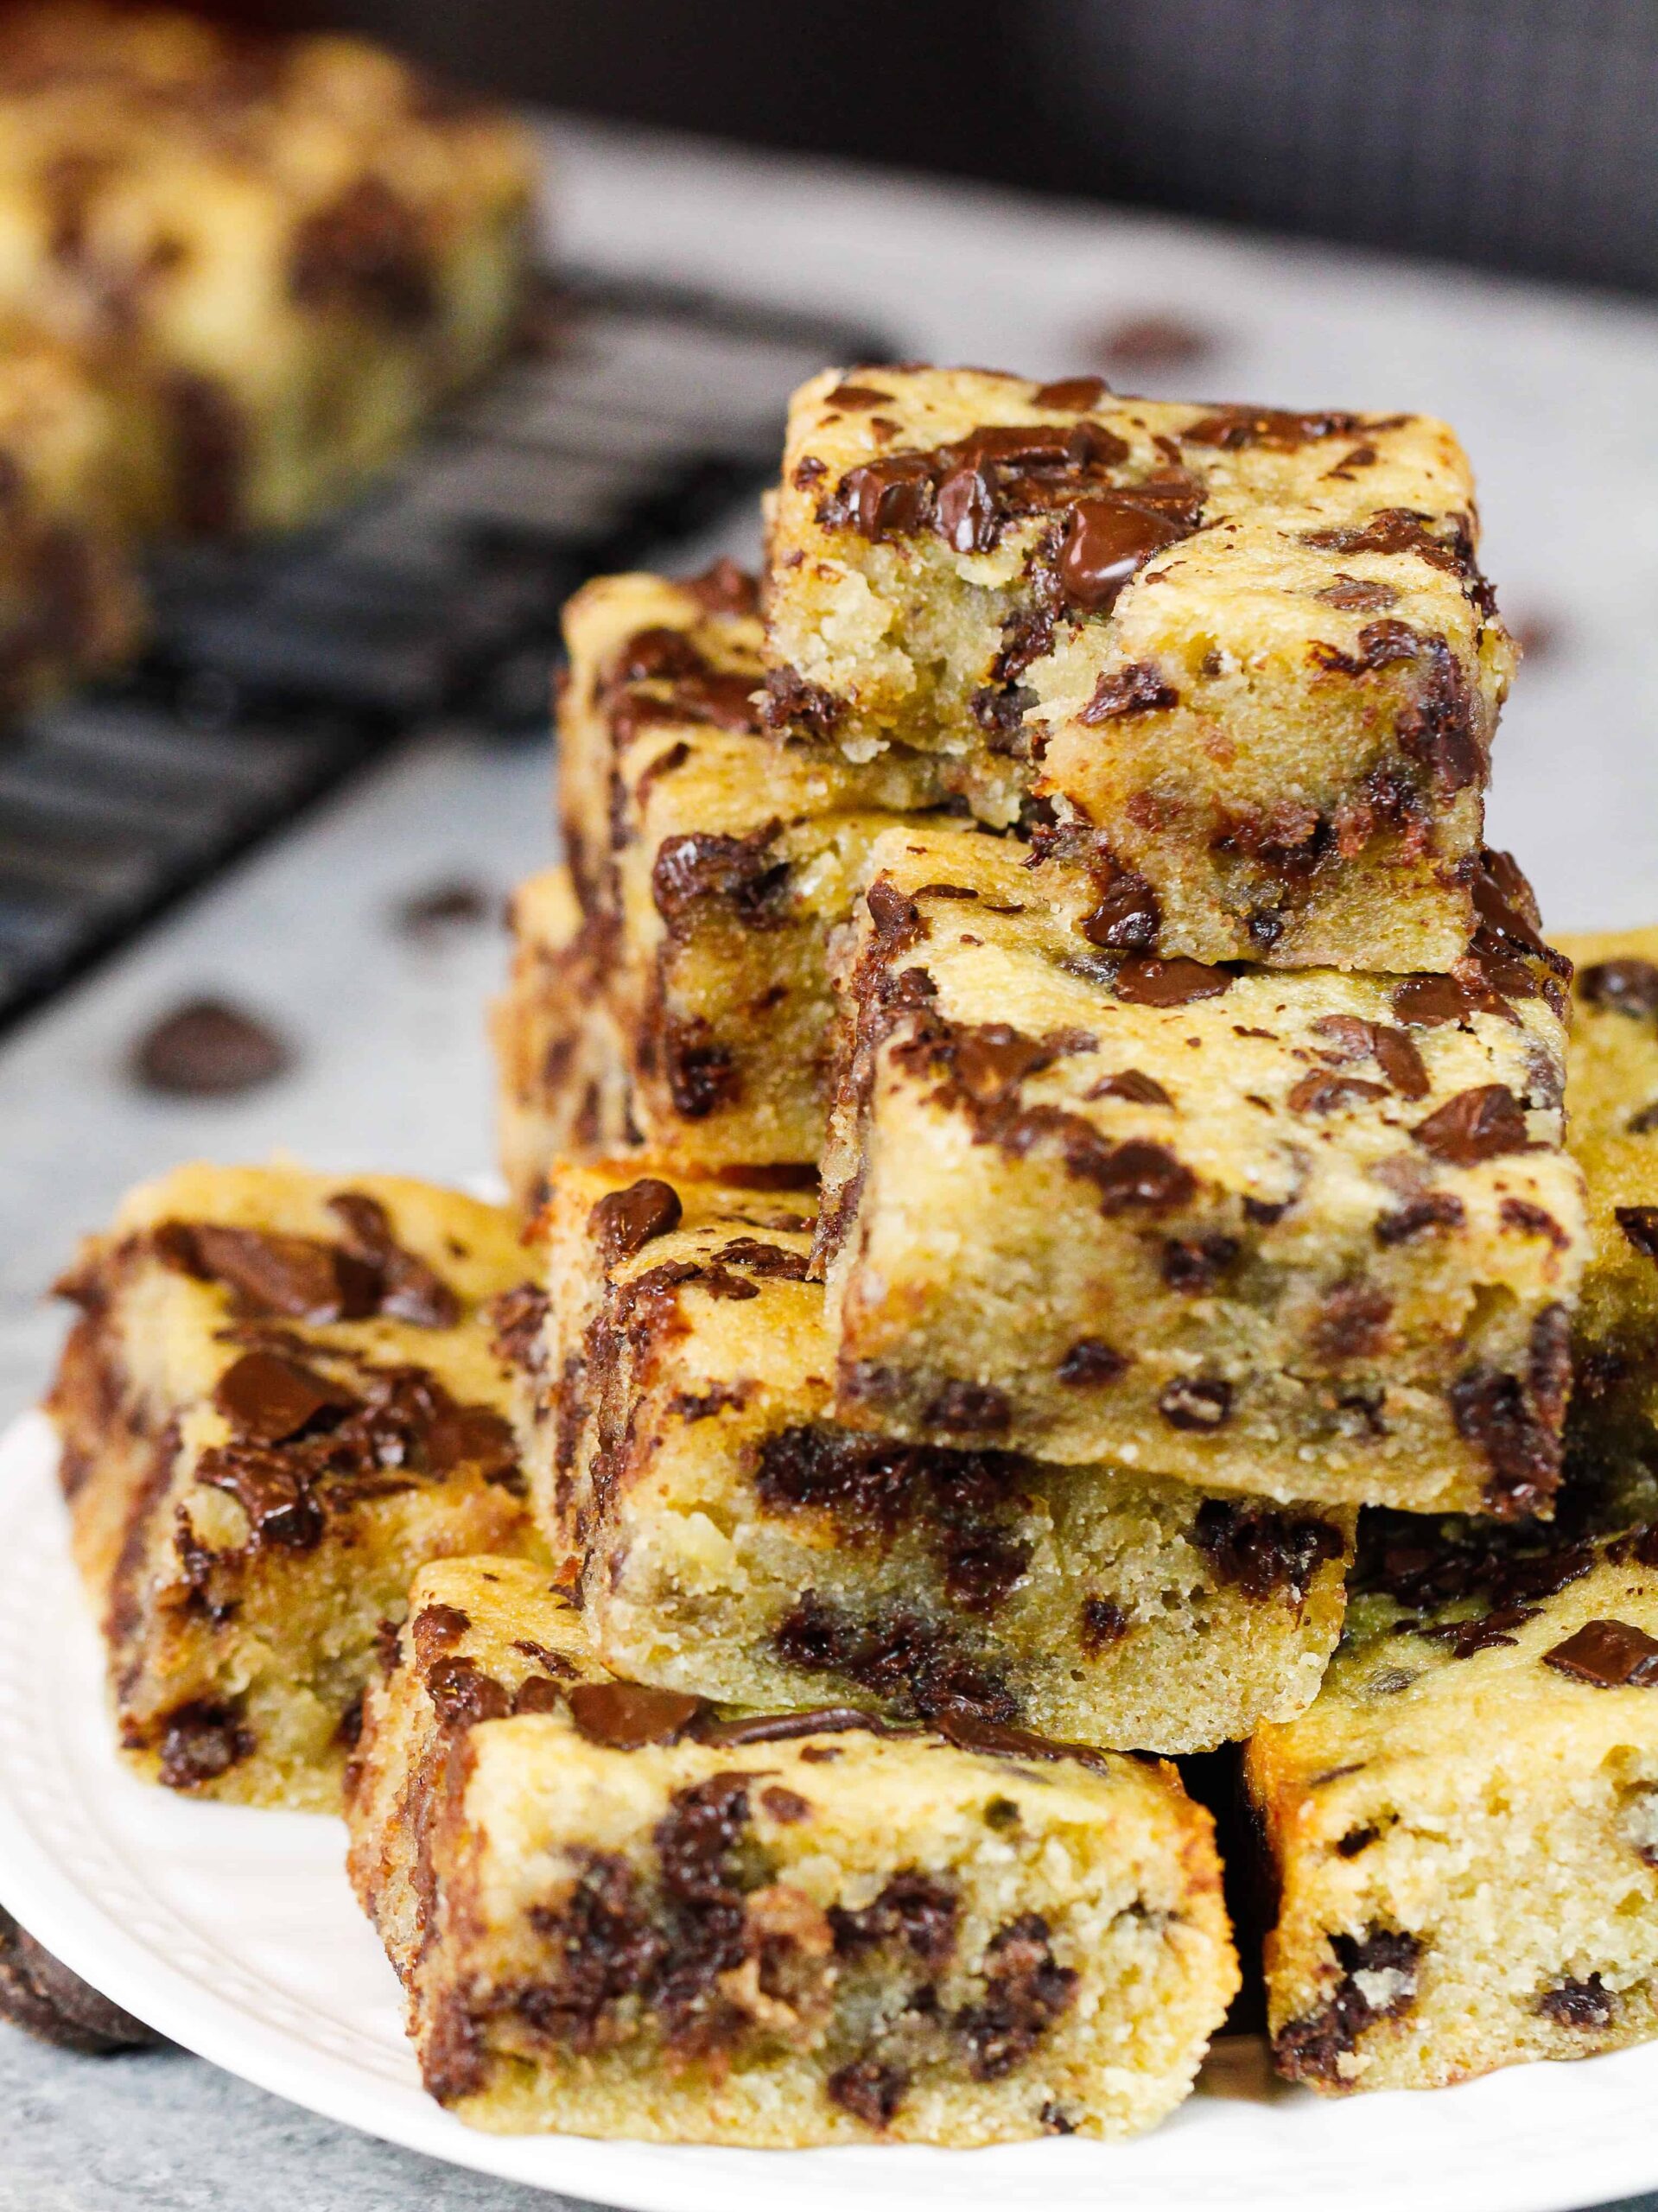 image of pile of banana chocolate chip bars stacked on a plate